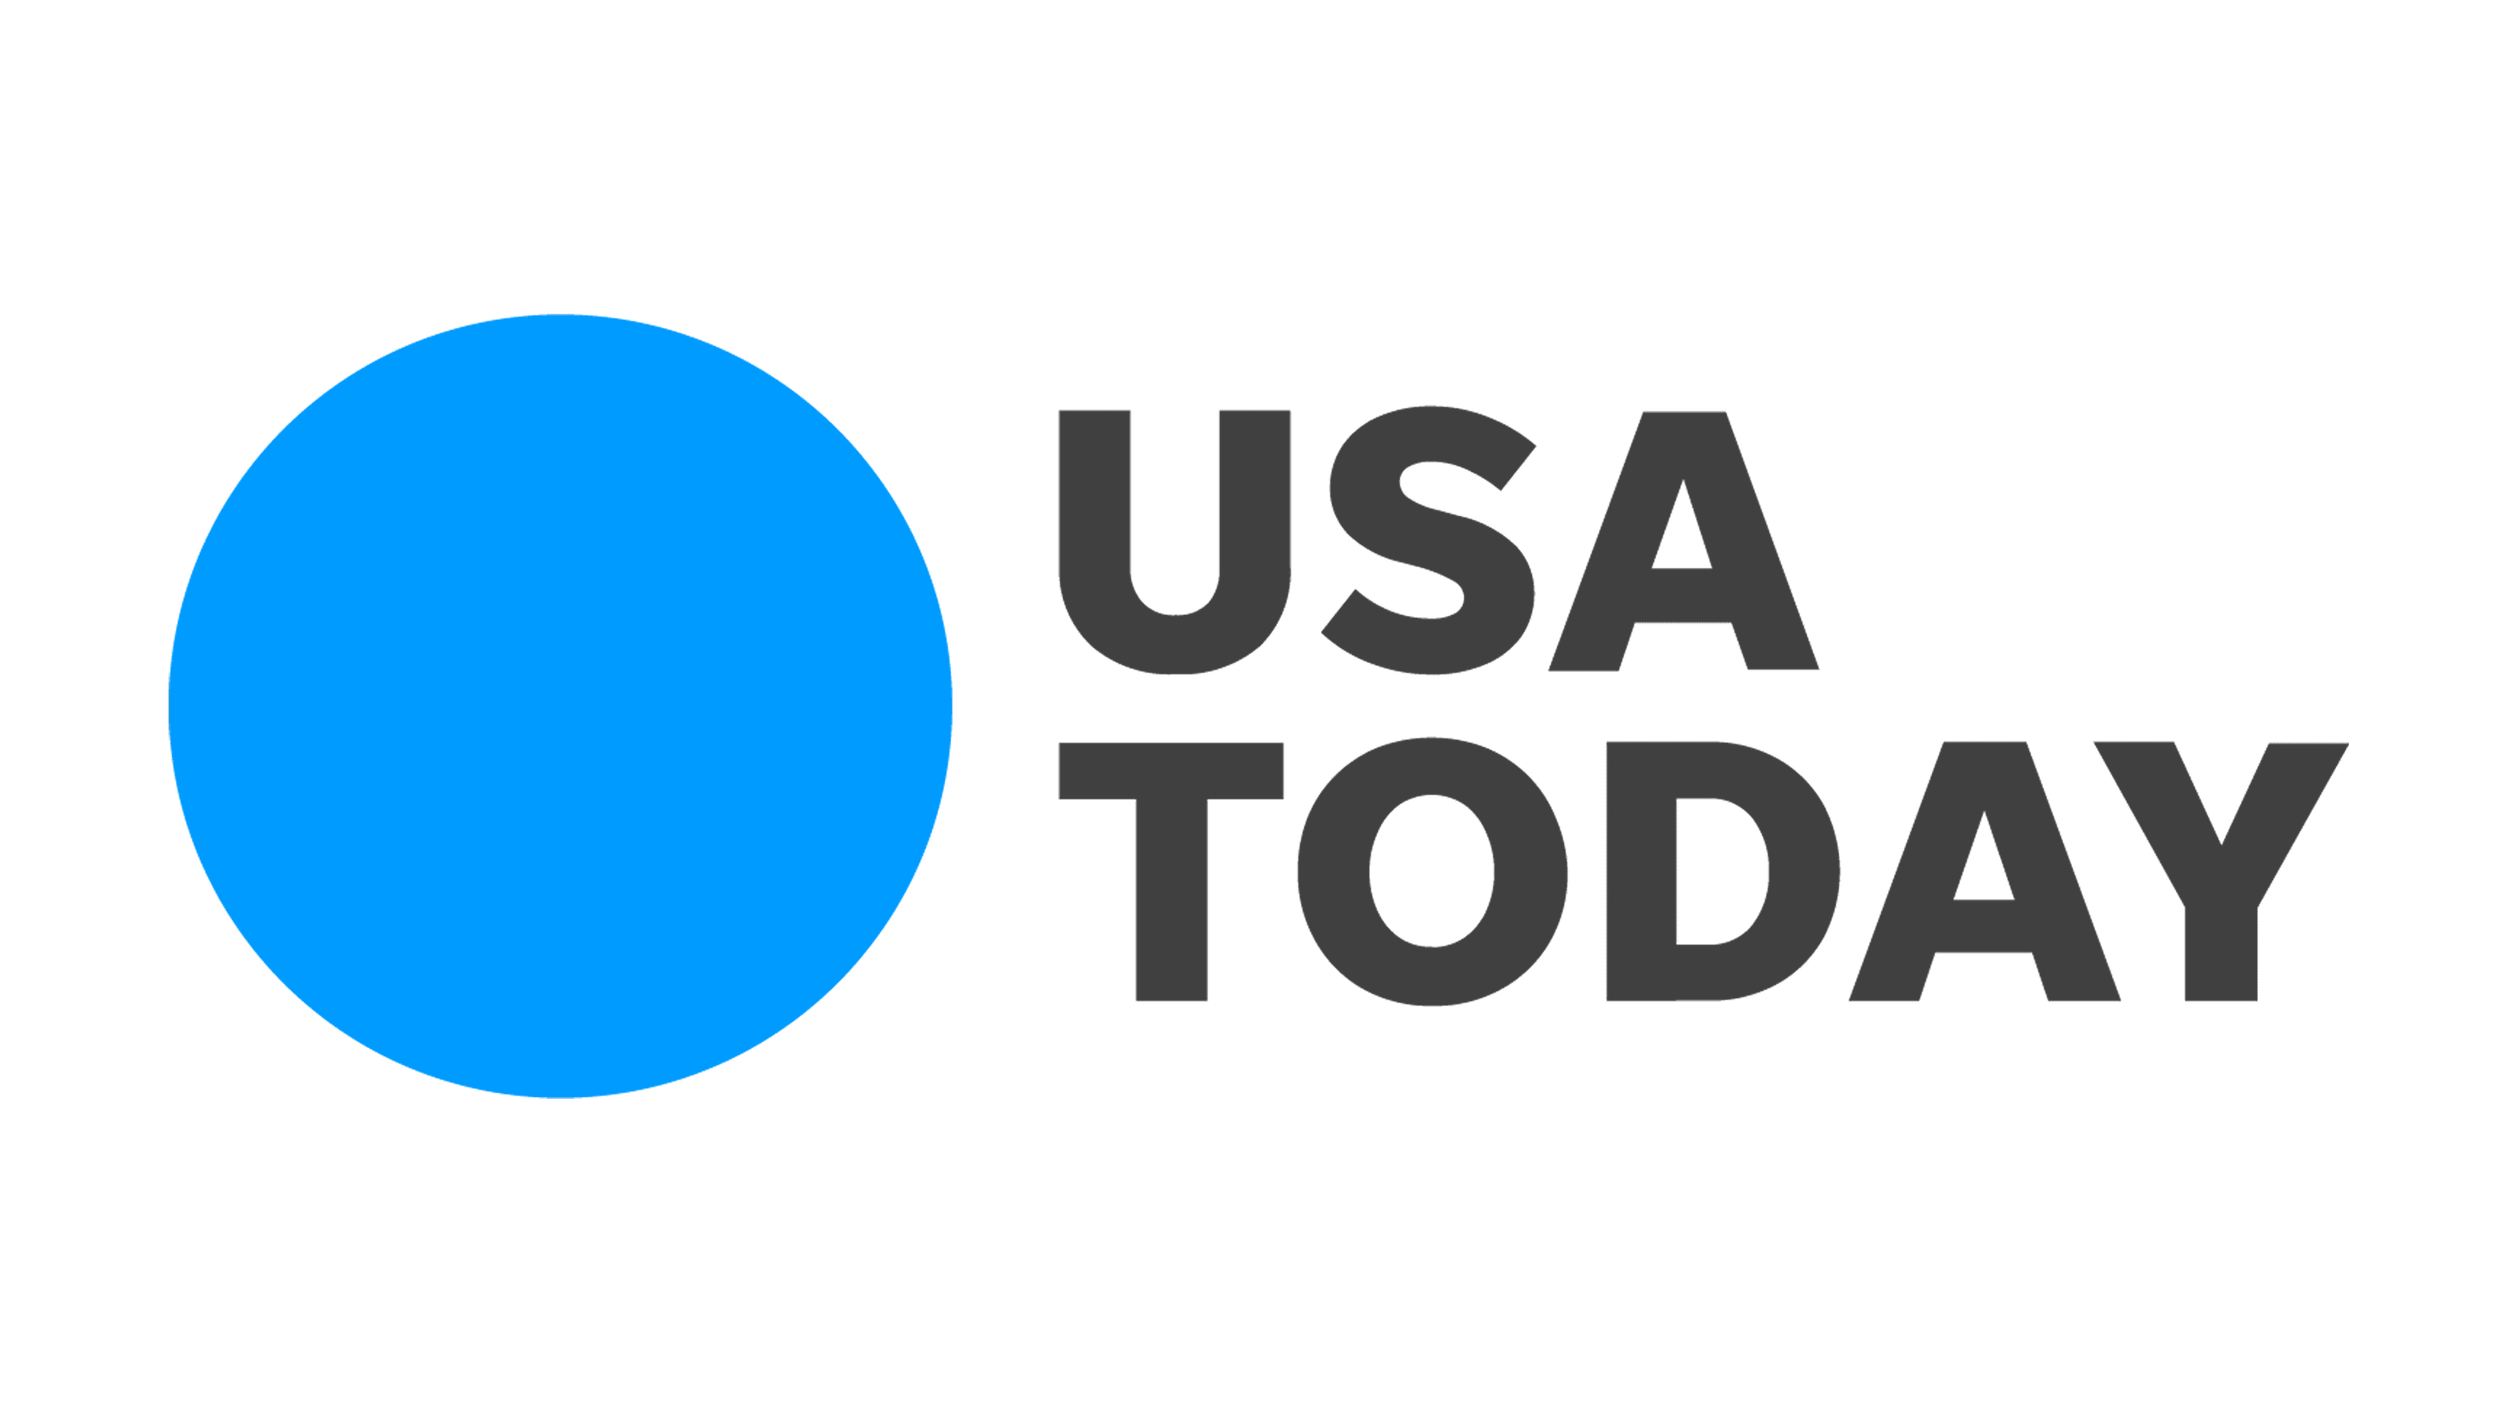 USA-Today-logo.png